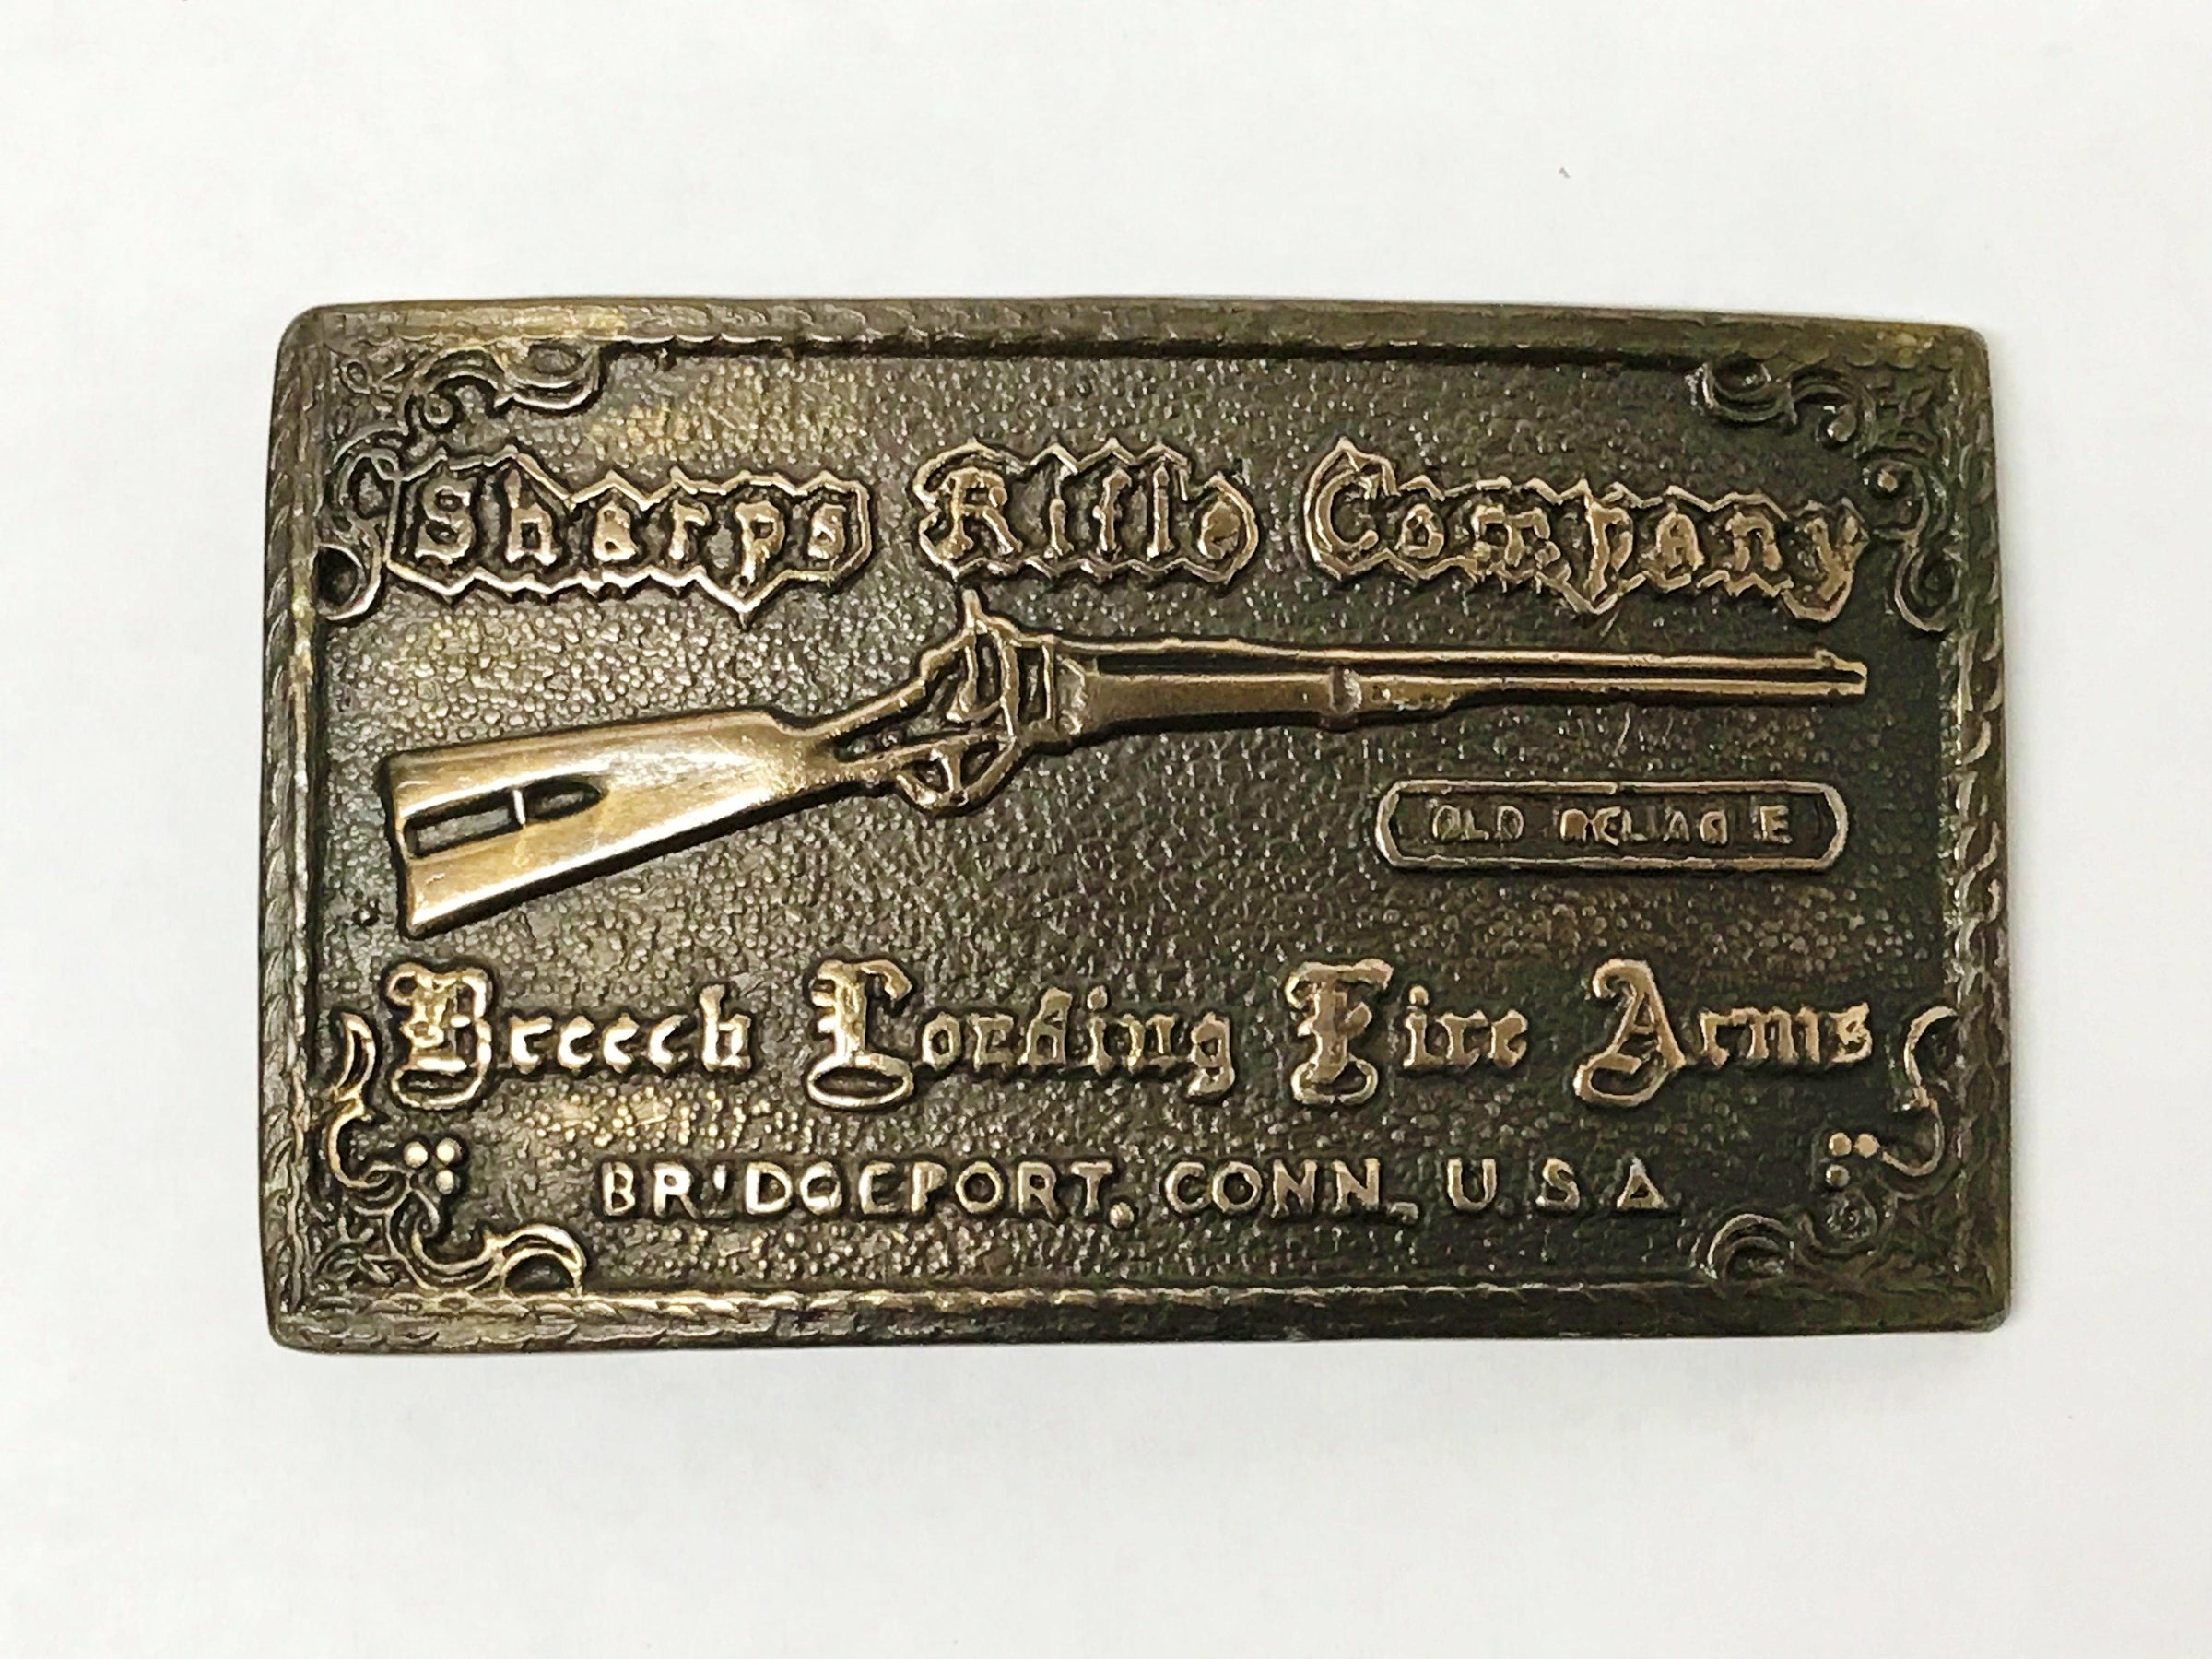 Sharp's Rifle Company "Old Reliable" Breech Loading Fire Arms Belt Buckle | USA - Hers and His Treasures